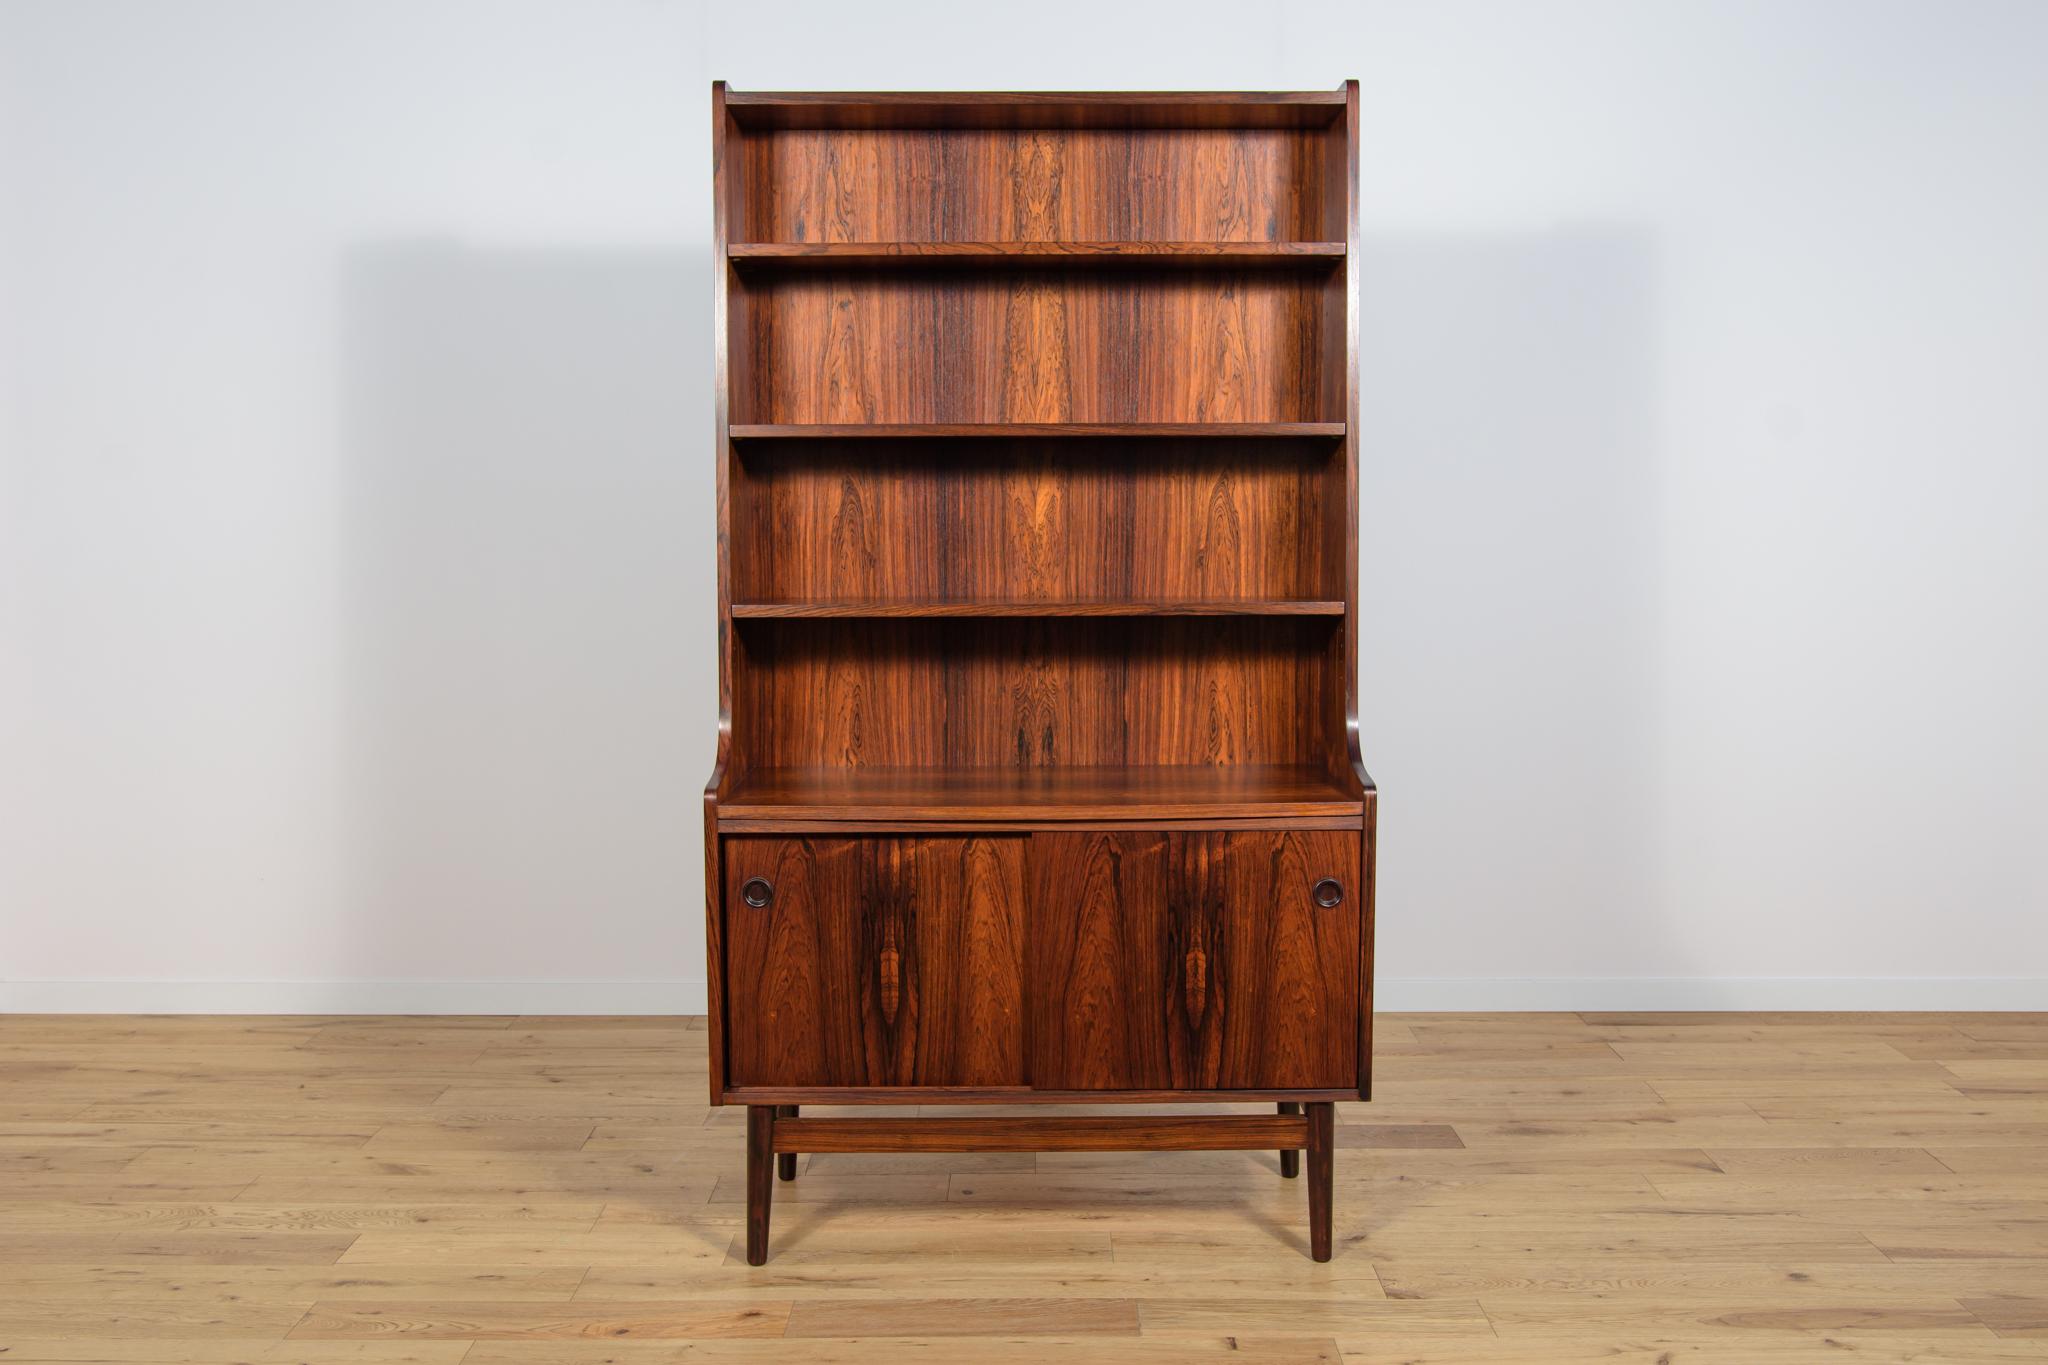 This Mid-Century Danish designed shelf was designed by Johannes Sorth and manufactured by Bornholms Møbelfabrik. It is made of rosewood. In the upper part of the bookcase there are four shelves, in the bottom part there are a sliding door cabinet.